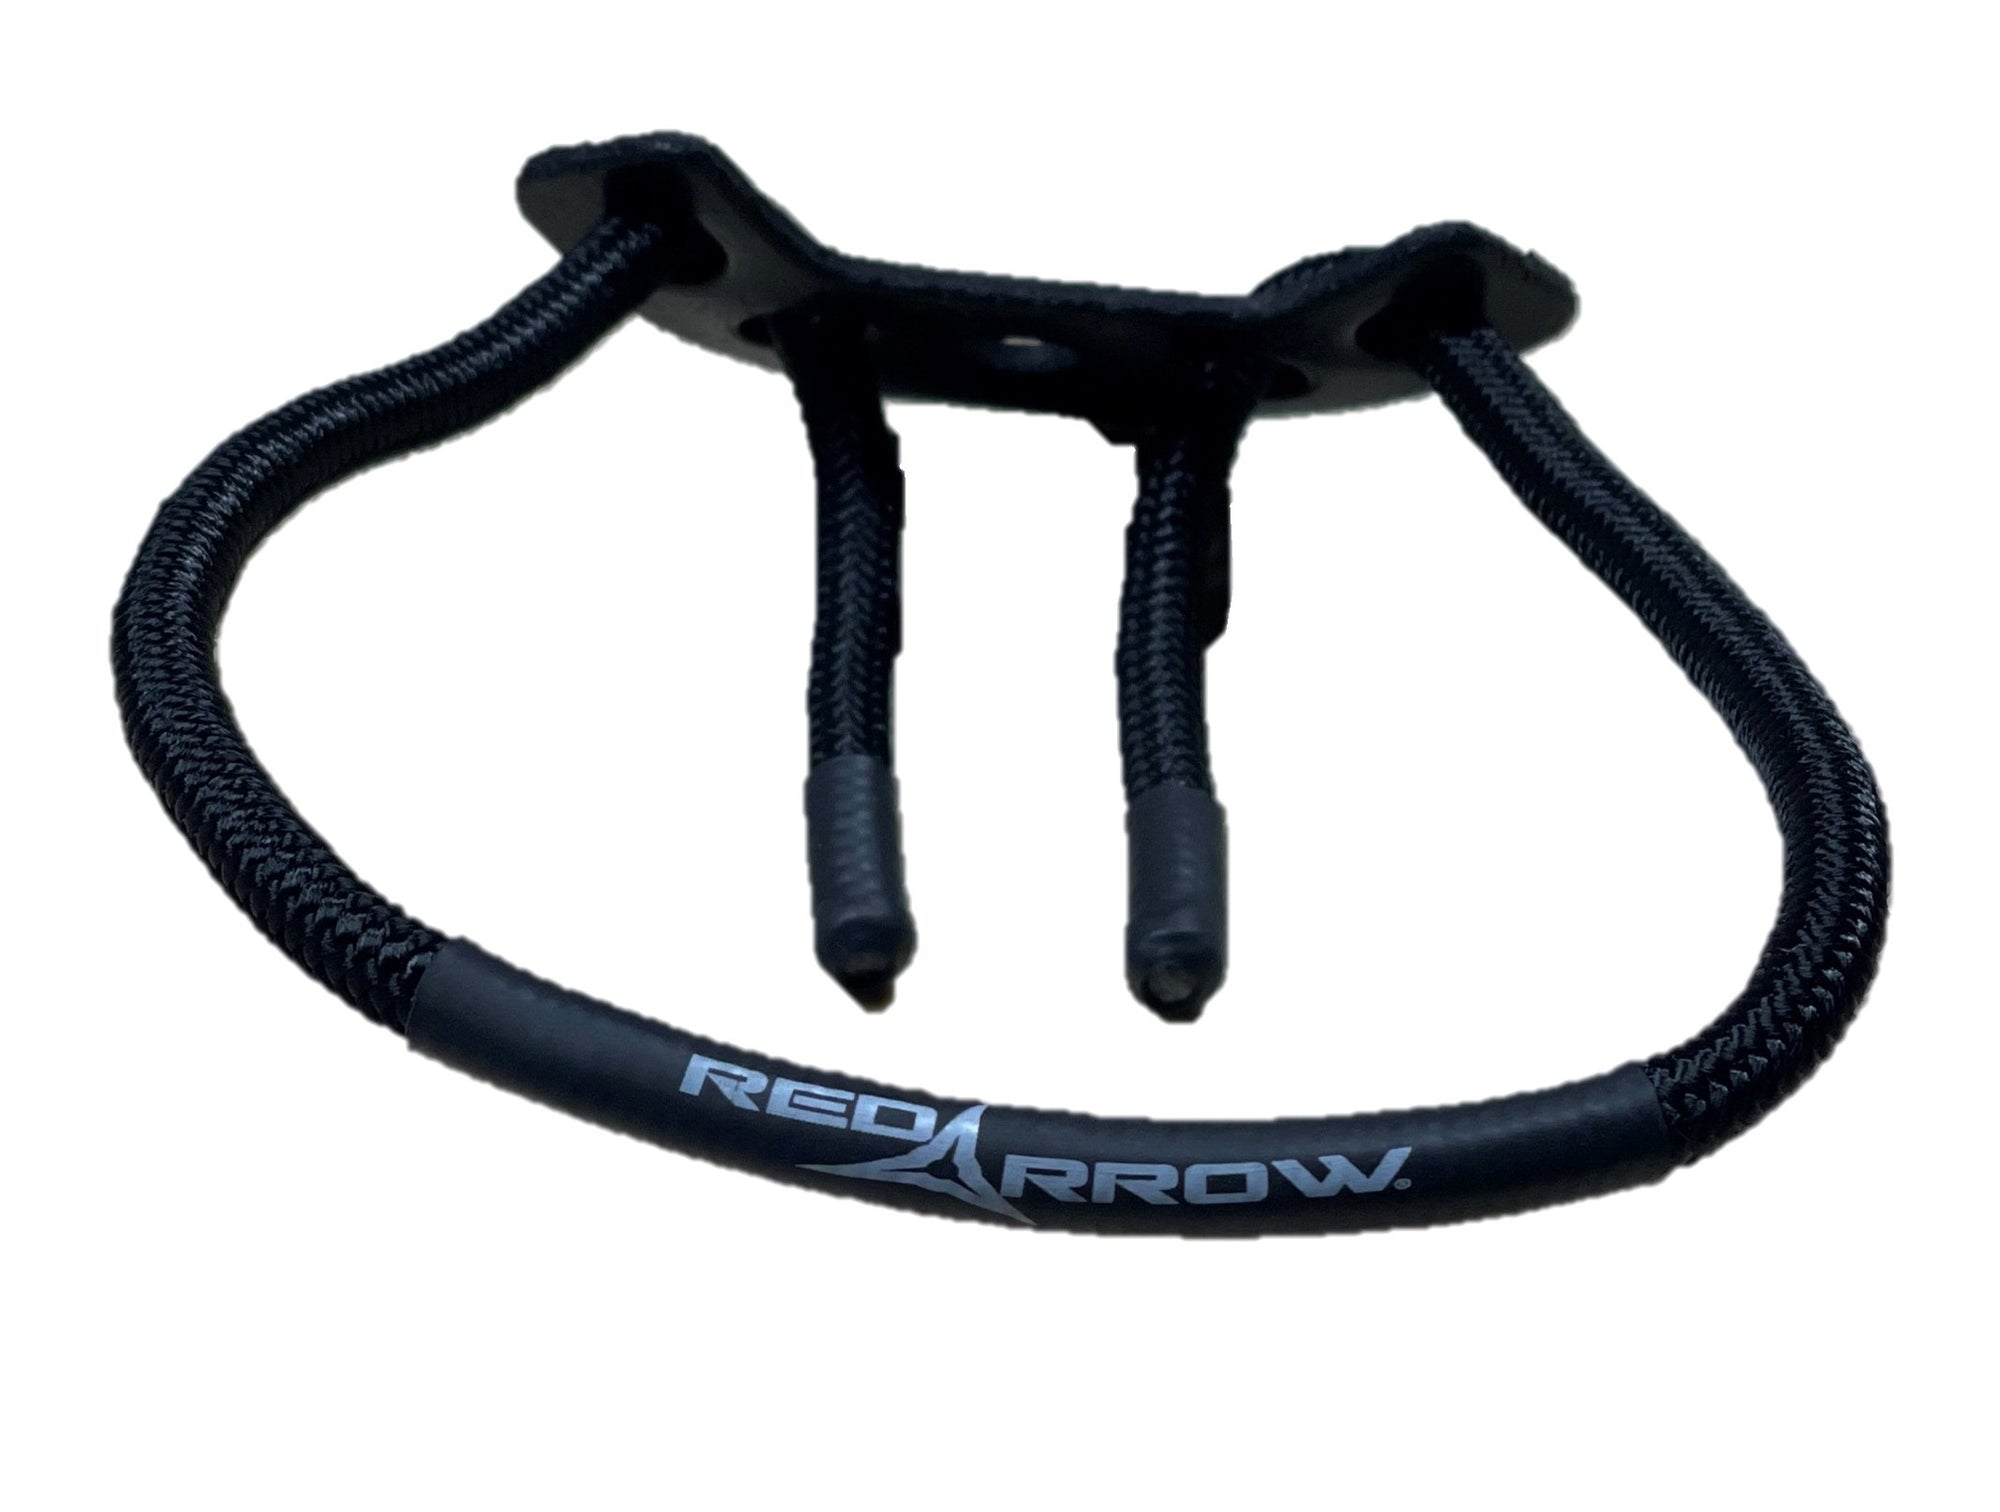 Red Arrow Bow Sling - Black